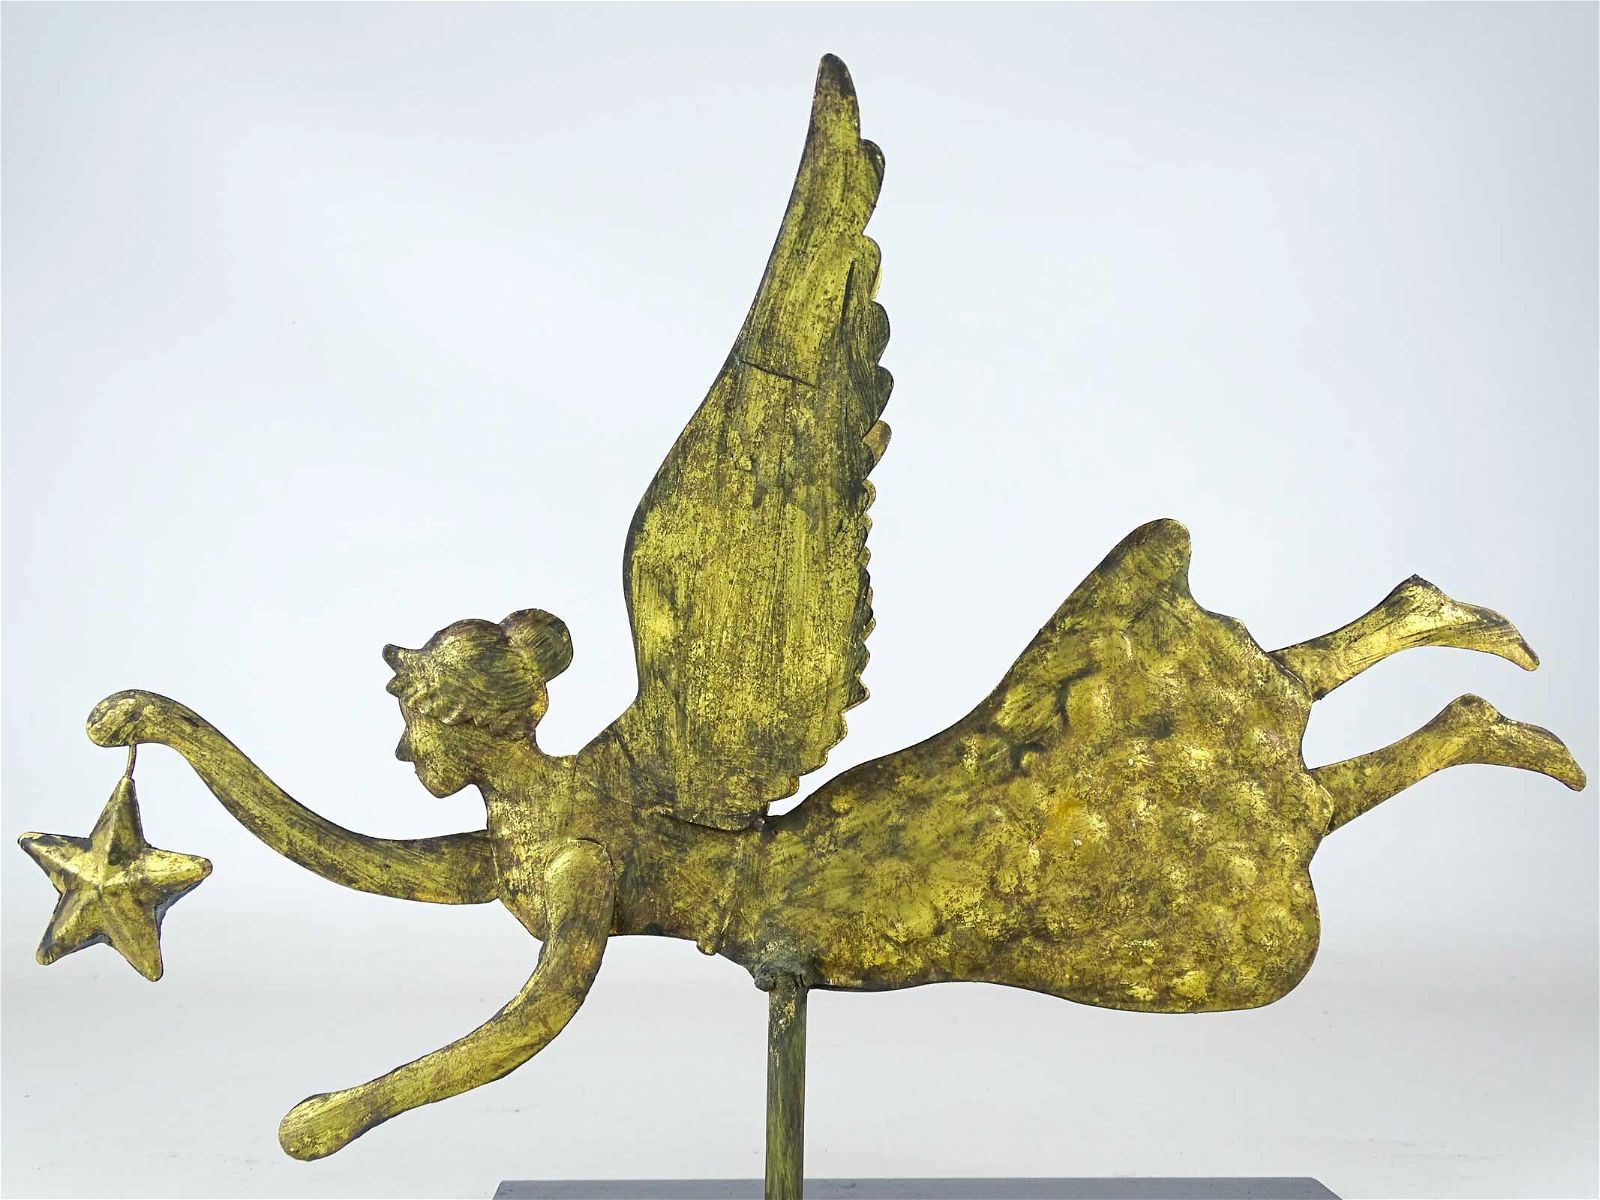 More than two dozen weathervanes lead Copake&#8217;s 44th annual New Year&#8217;s Day sale Jan. 1